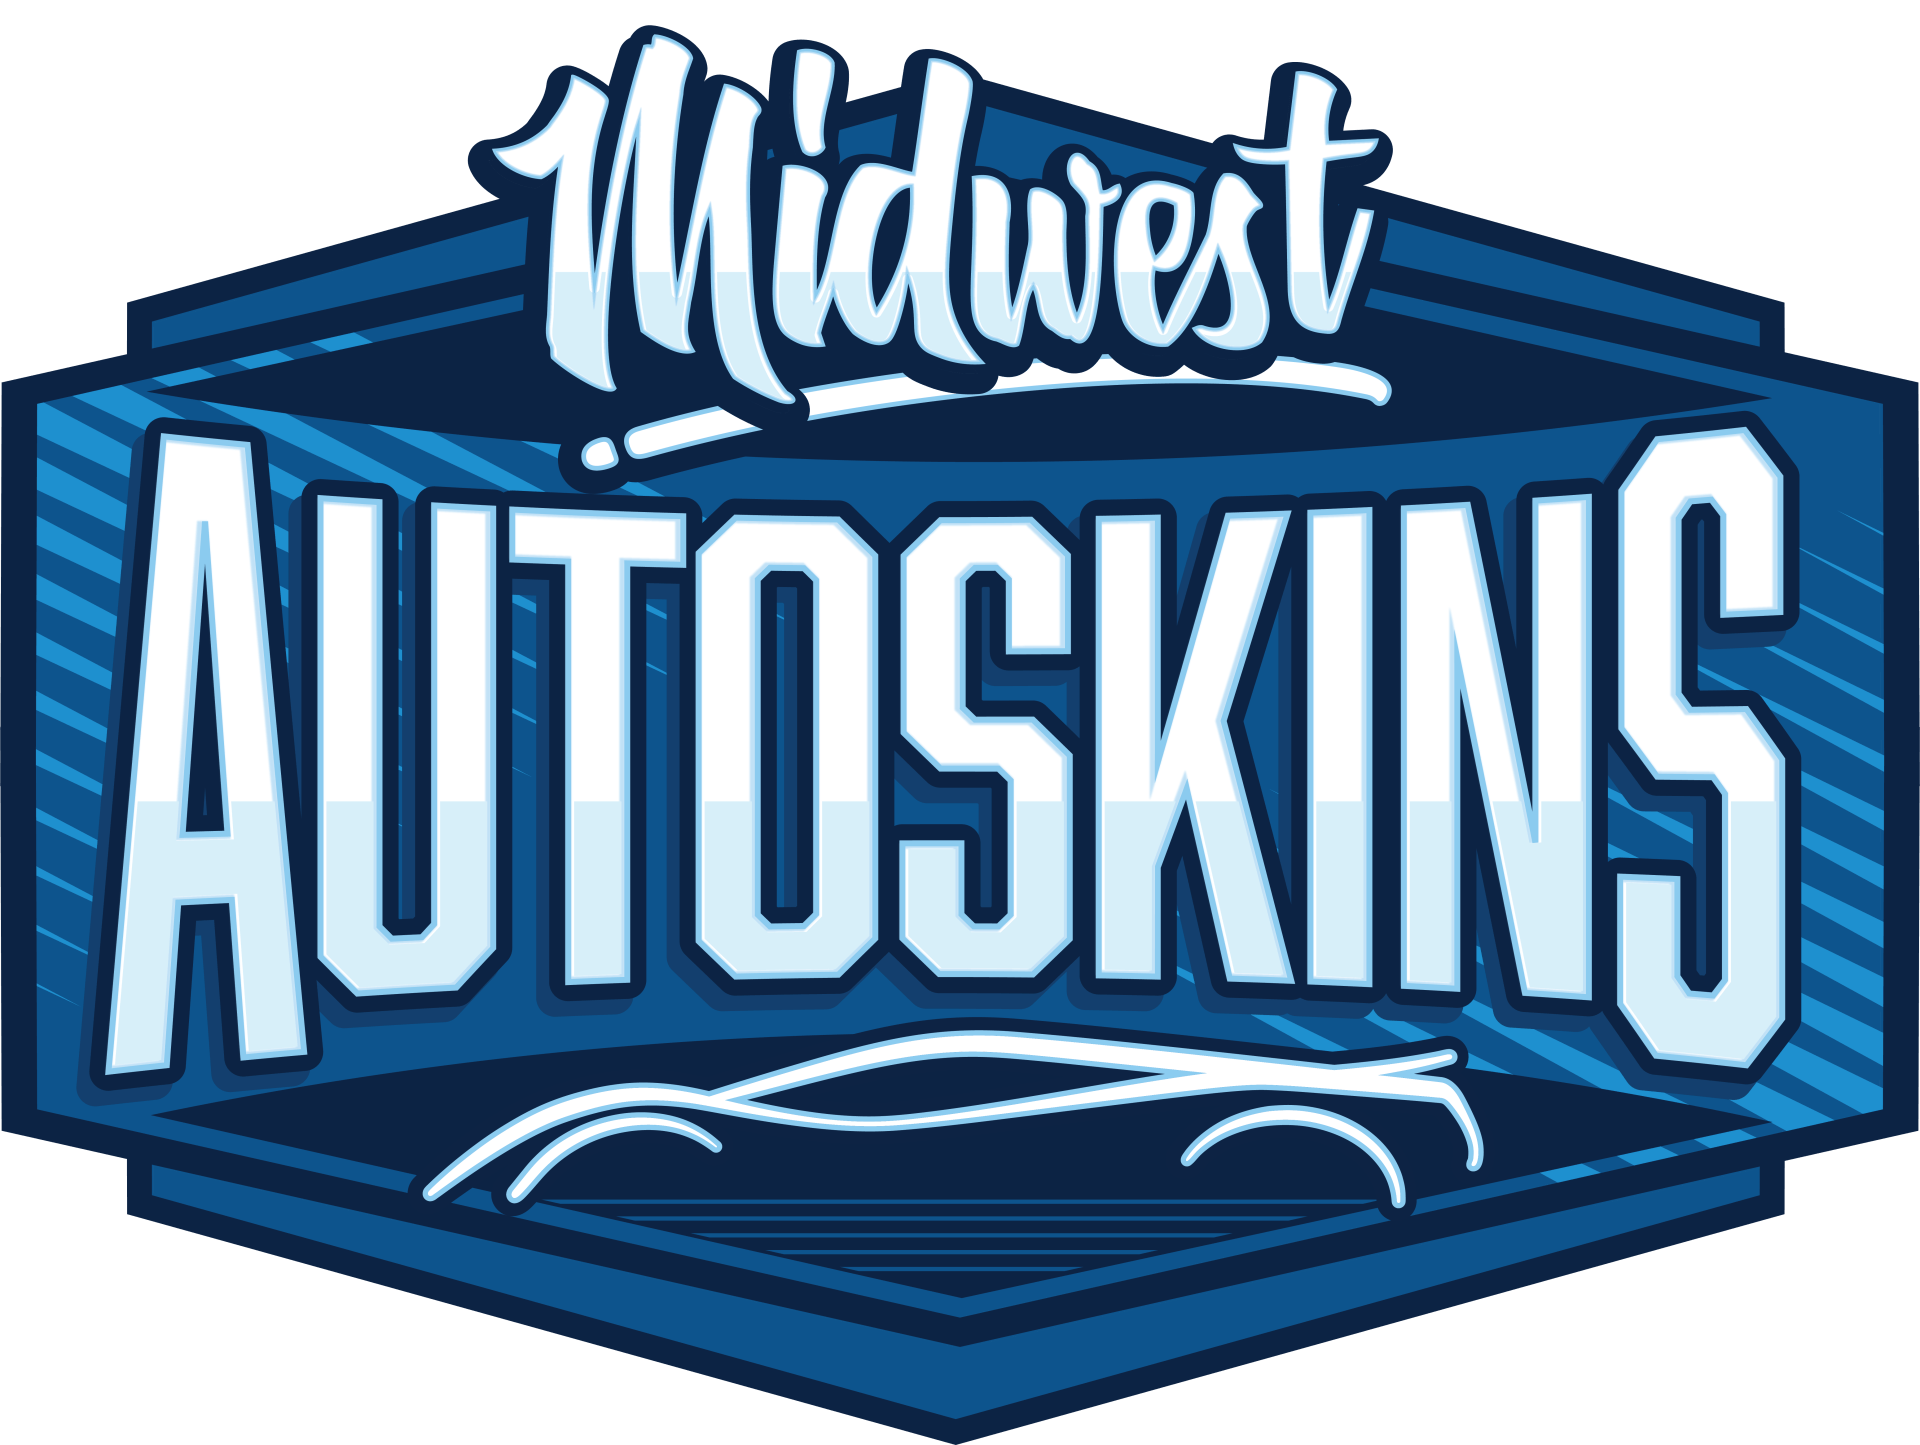 Midwest AutoSkins logo